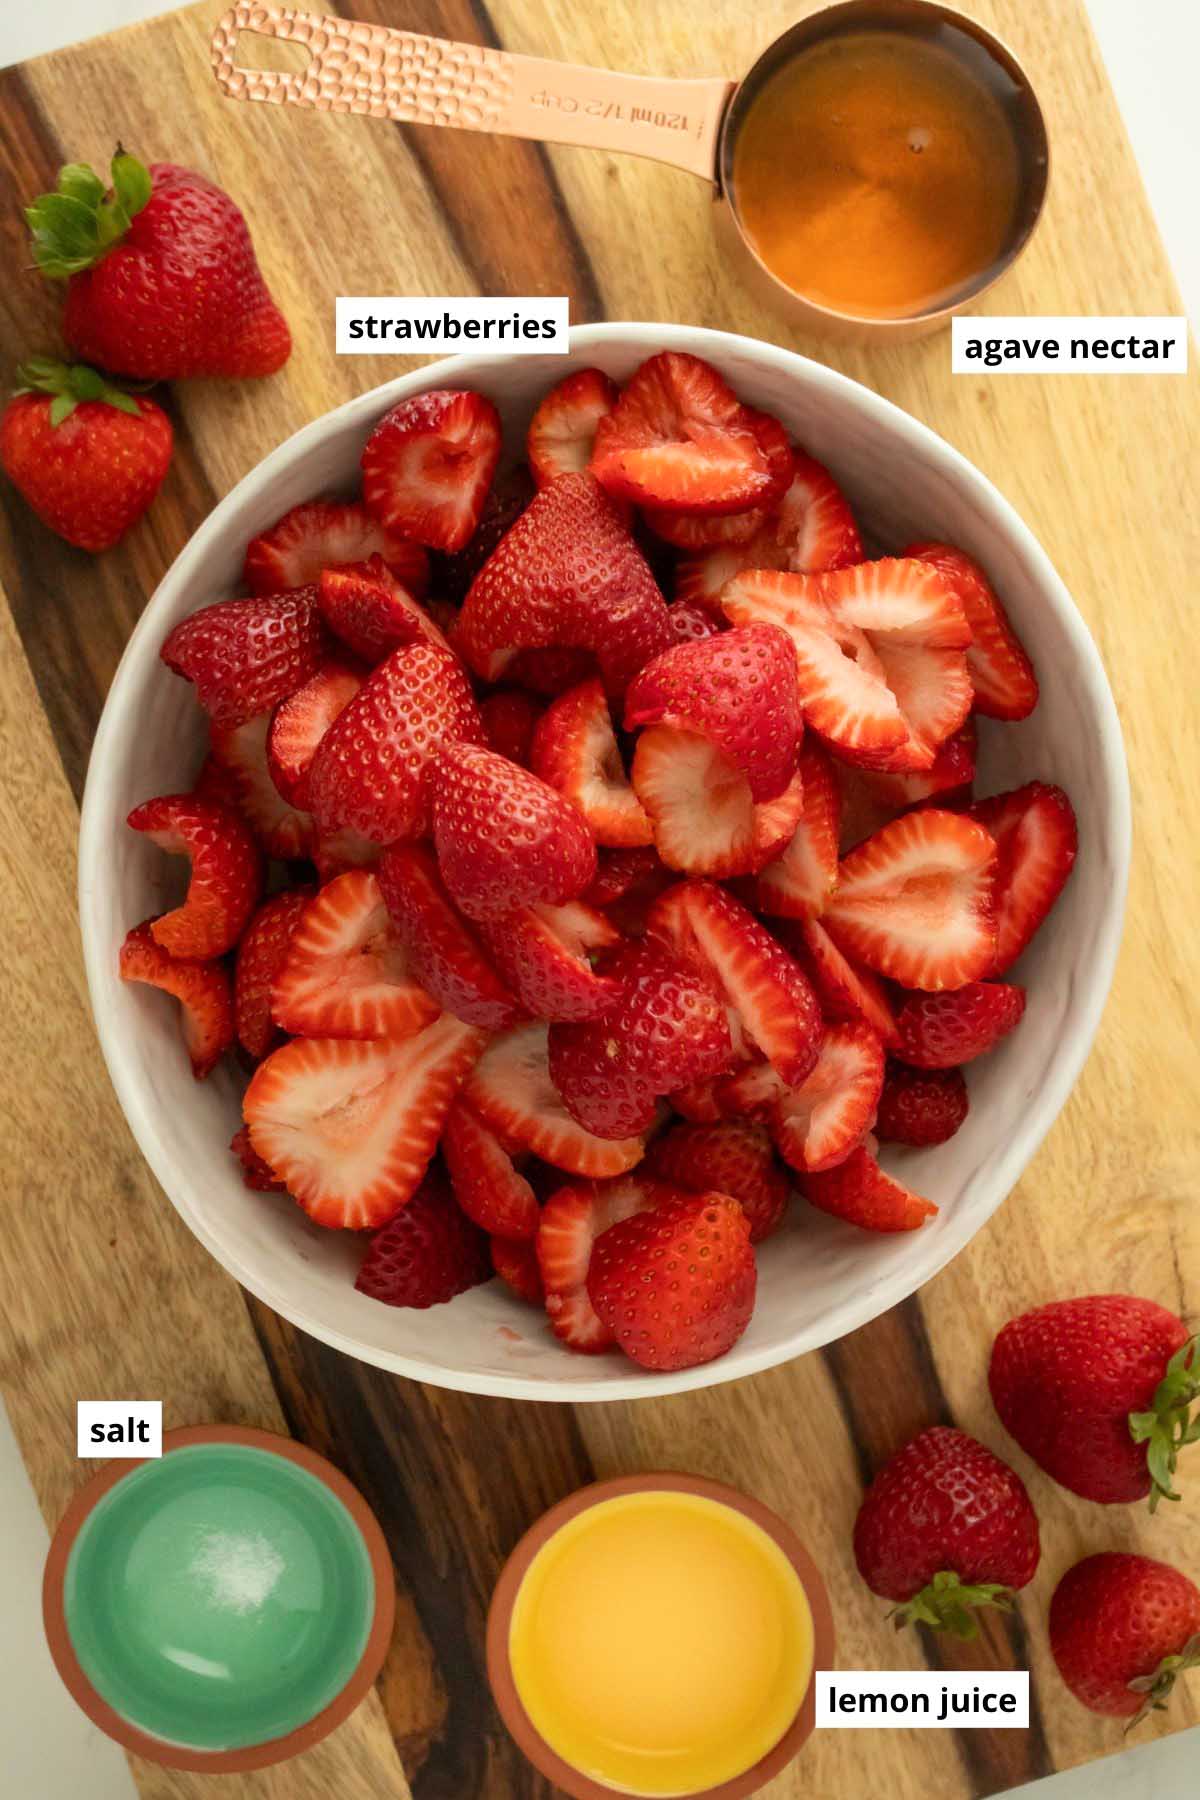 strawberries, agave nectar, salt, and lemon juice in bowls on a wooden table